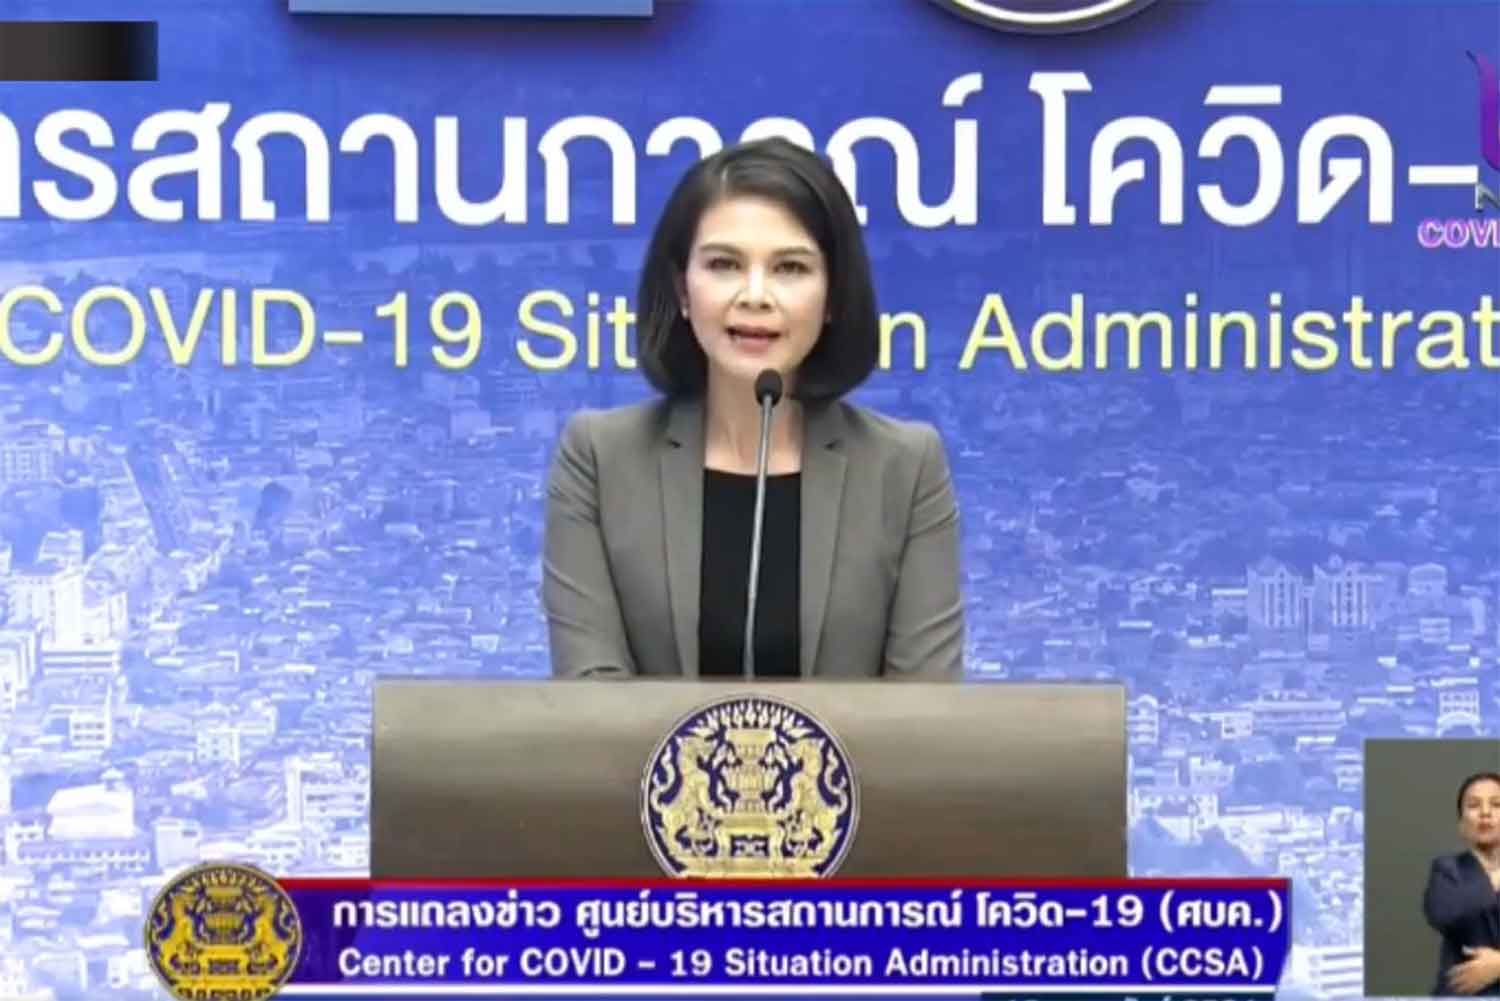 Expatriates Guaranteed Access to Covid-19 Vaccinations in Thailand